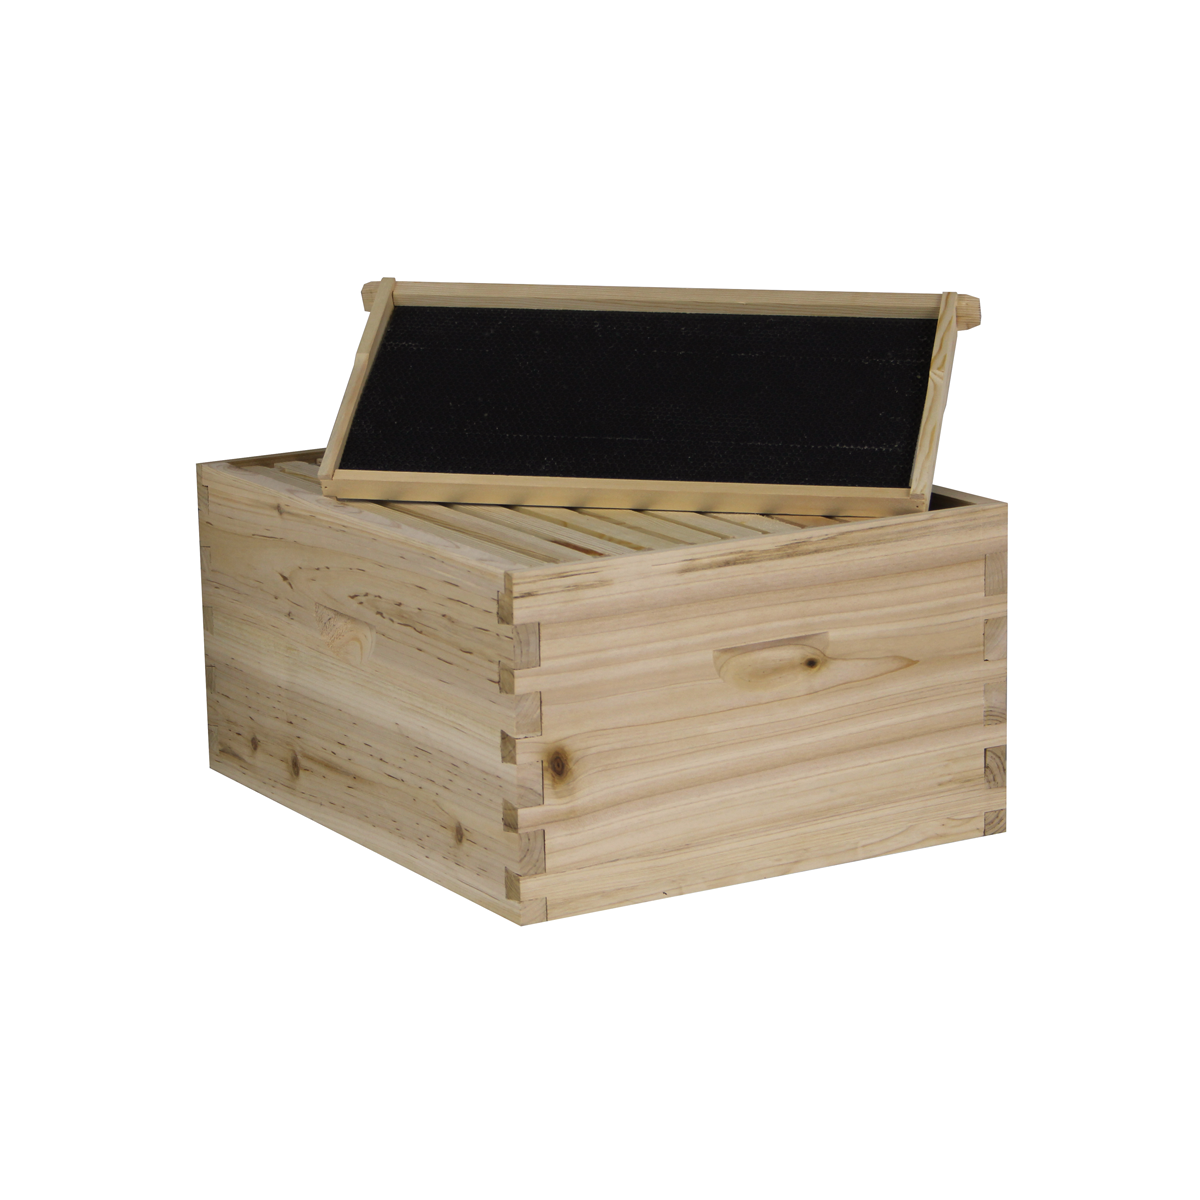 10 Frame Deep Brood Box w/ Dovetail Joints (Unassembled w/ Frames and Foundations)